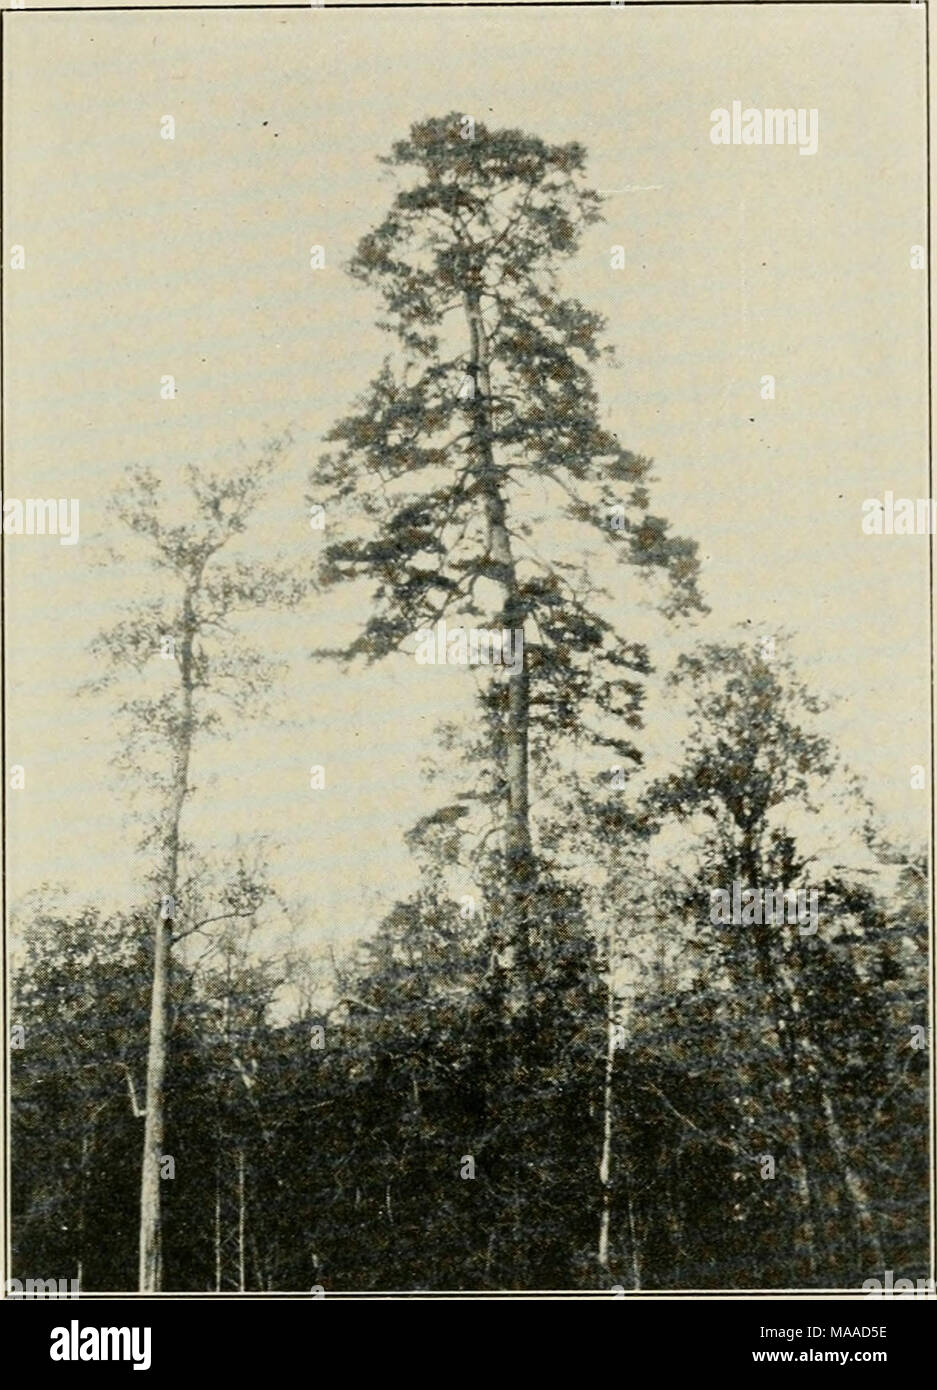 . Economic botany of Alabama . Fig. 10. Pi)ius glabra, about two feet in diameter and 75 feet tall, in Conecuh River bottoms northwest of Troy, Pike County. December 11, 1905. sweet guni, and other hardwoods. It is strictly confined to the coastal plain, and scarcely extends north of latitude 33&quot; in any part of its range. 6A (r). One or two small trees a little south of Maplesville, perhaps of recent introduction. Native along a small creek about six miles east of Wetumpka, and along creeks in the northern part of Macon County. Sev- eral years ago some pine cones from a peaty stratum in a Stock Photo